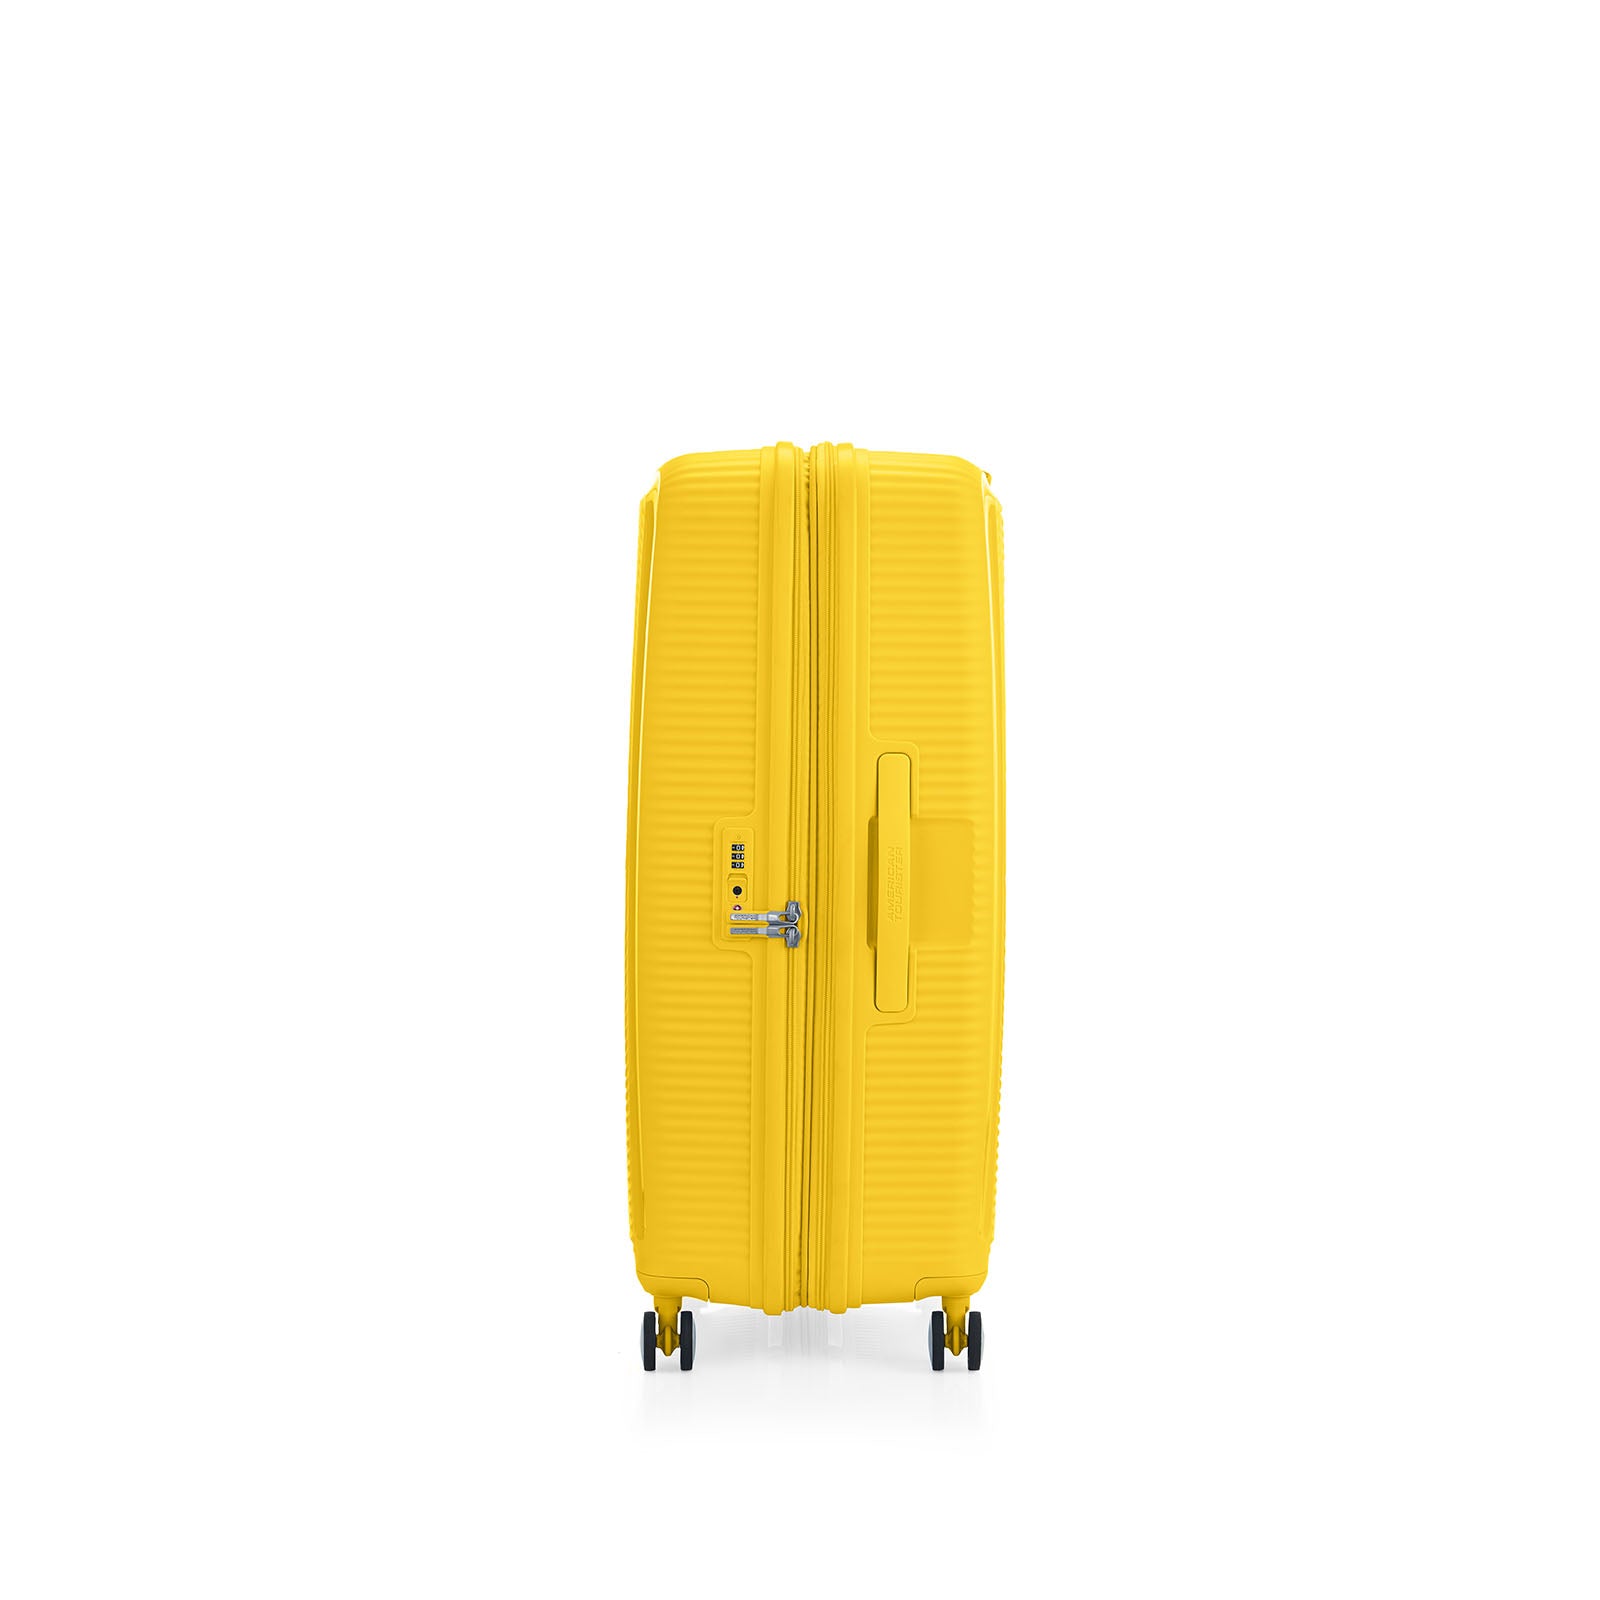 American-Tourister-Curio-2-80cm-Suitcase-Golden-Yellow-Side